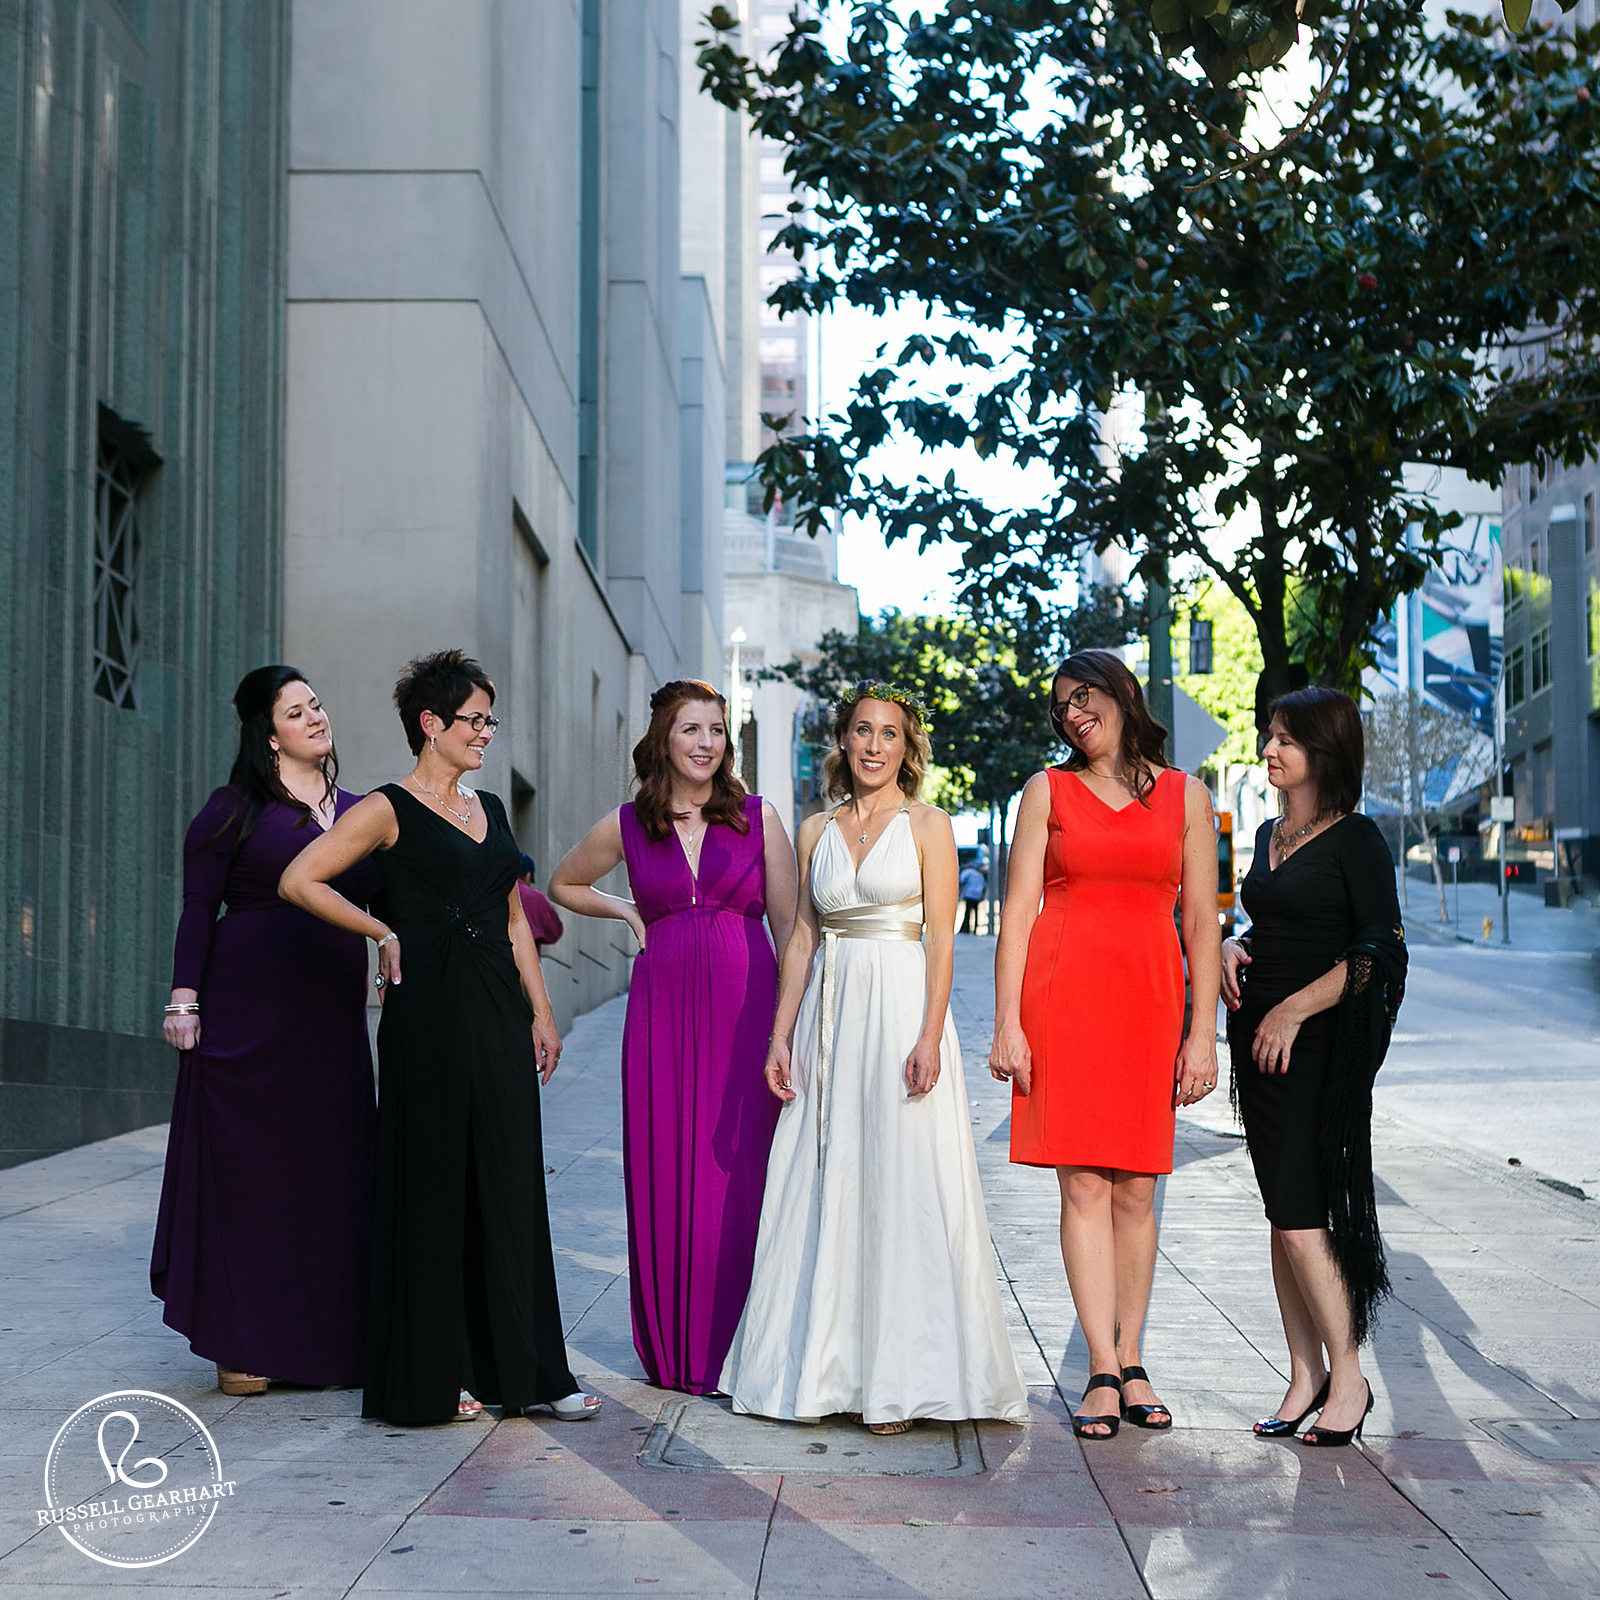 Bridal Party Portraits in Downtown LA – Halloween Wedding at the Millwick in Downtown Los Angeles – Russell Gearhart Photography – www.gearhartphoto.com